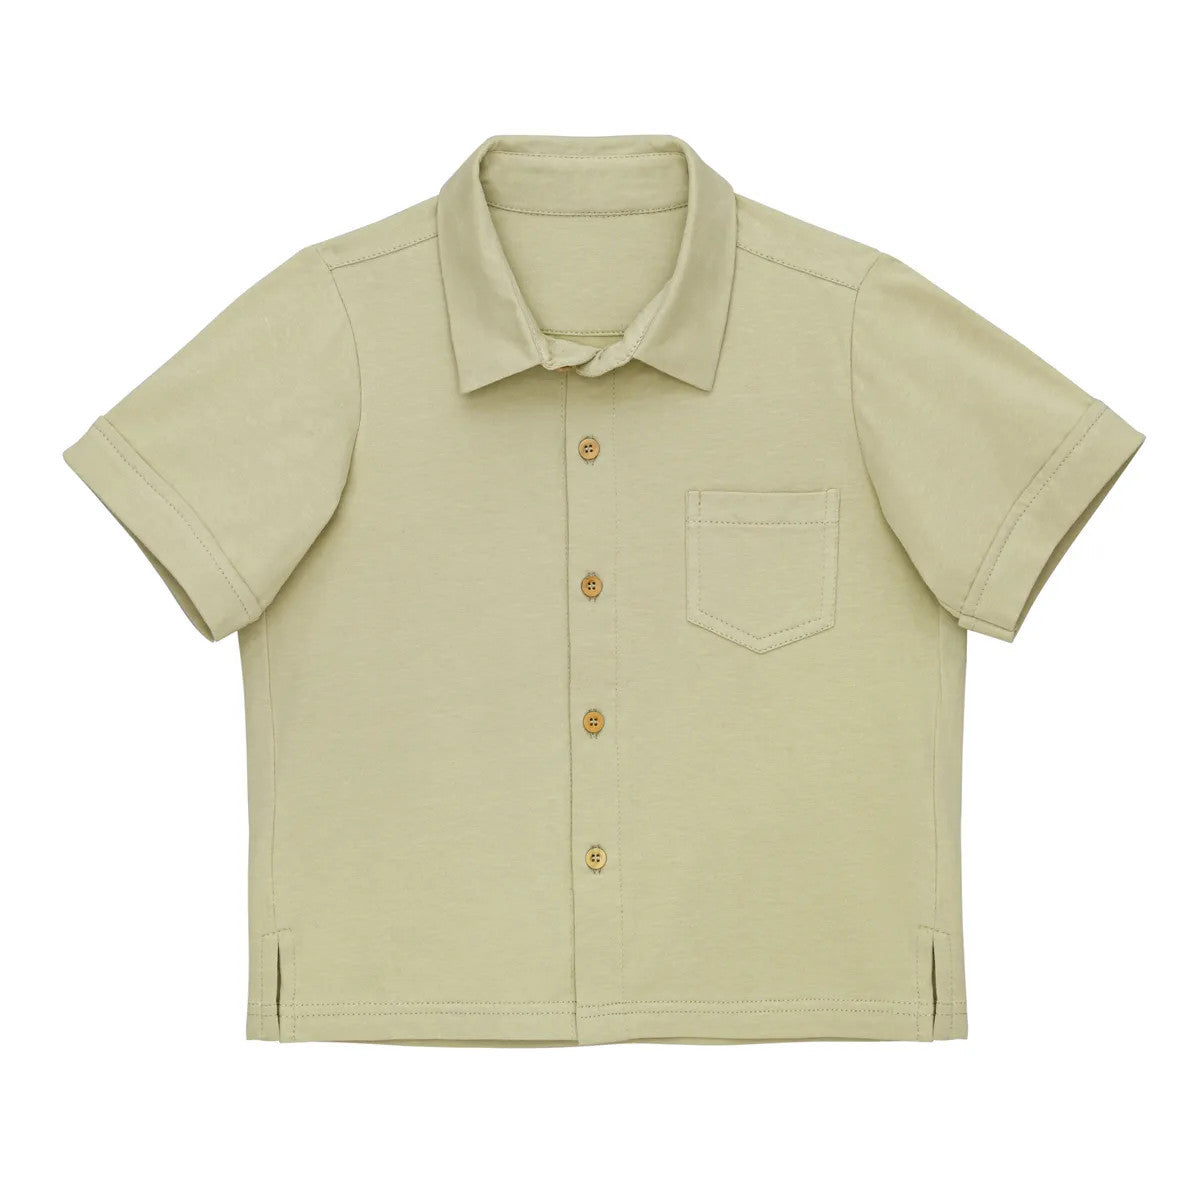 Super Little Hedonist soft beige organic button down shirt for boys and girls. Sustainable unisex kids clothing made from organic cotton.